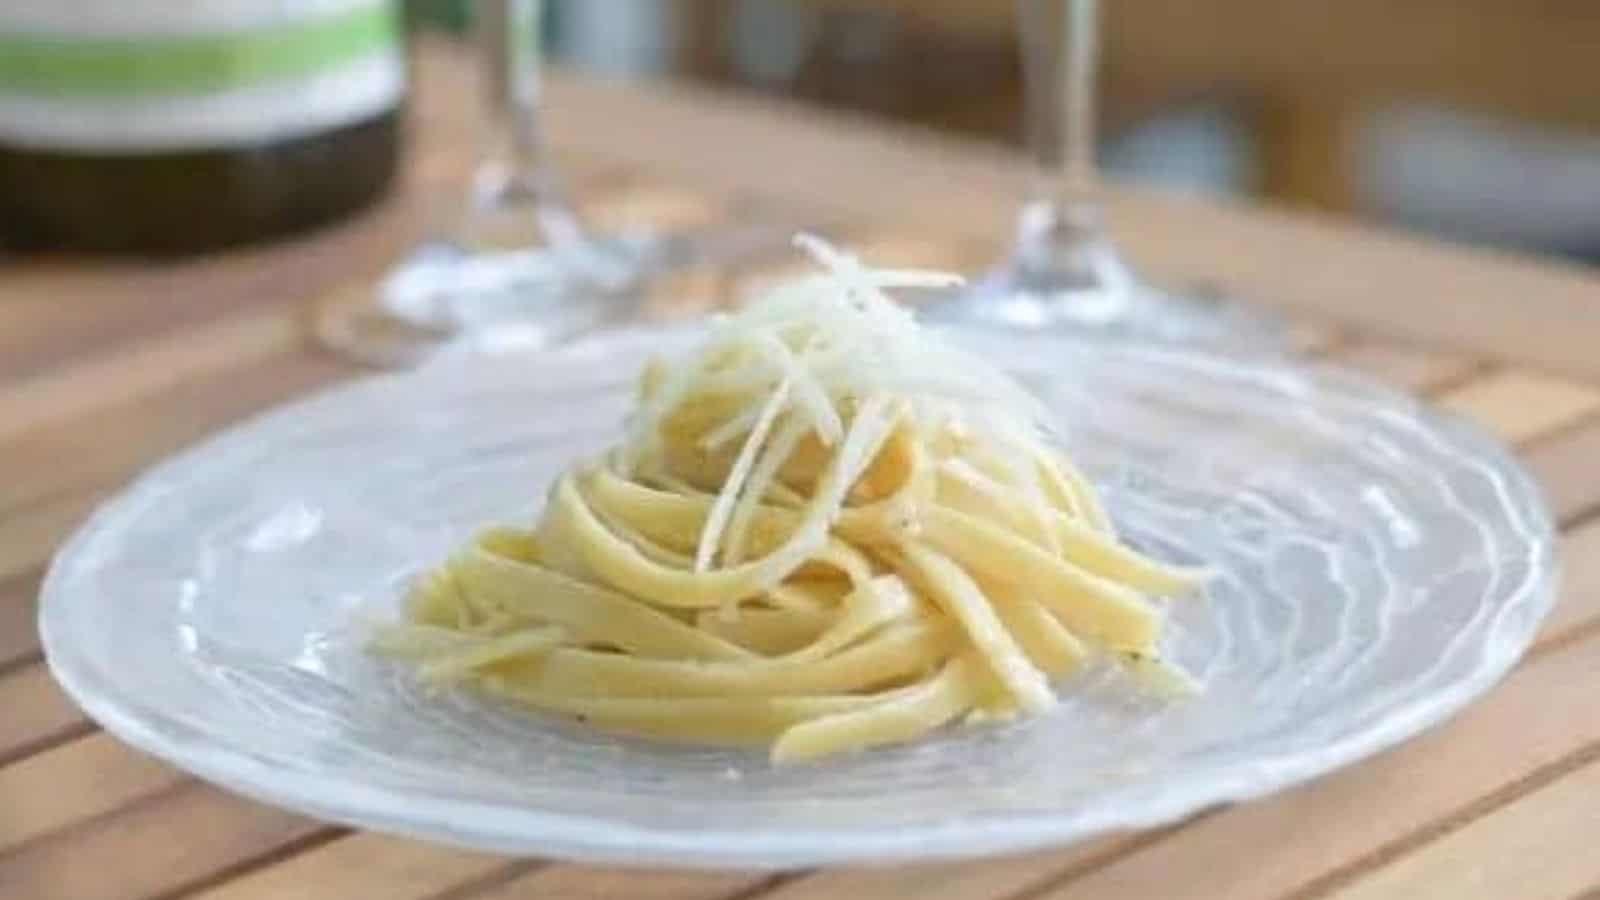 Image shows a plate with cacio e pepe in a neat pile topped with shaved parmesan cheese.